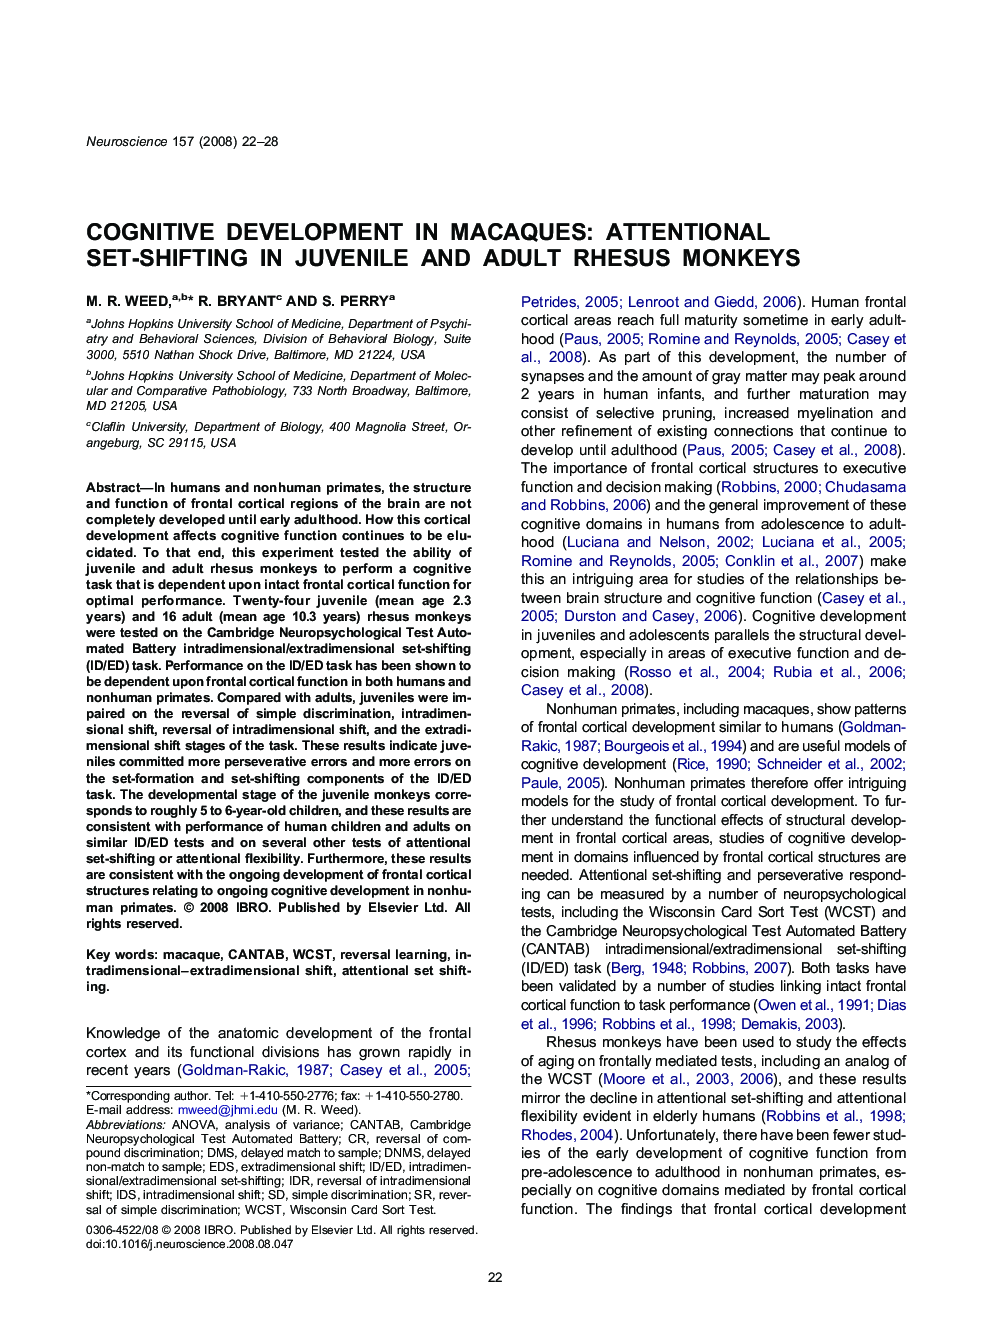 Cognitive development in macaques: Attentional set-shifting in juvenile and adult rhesus monkeys